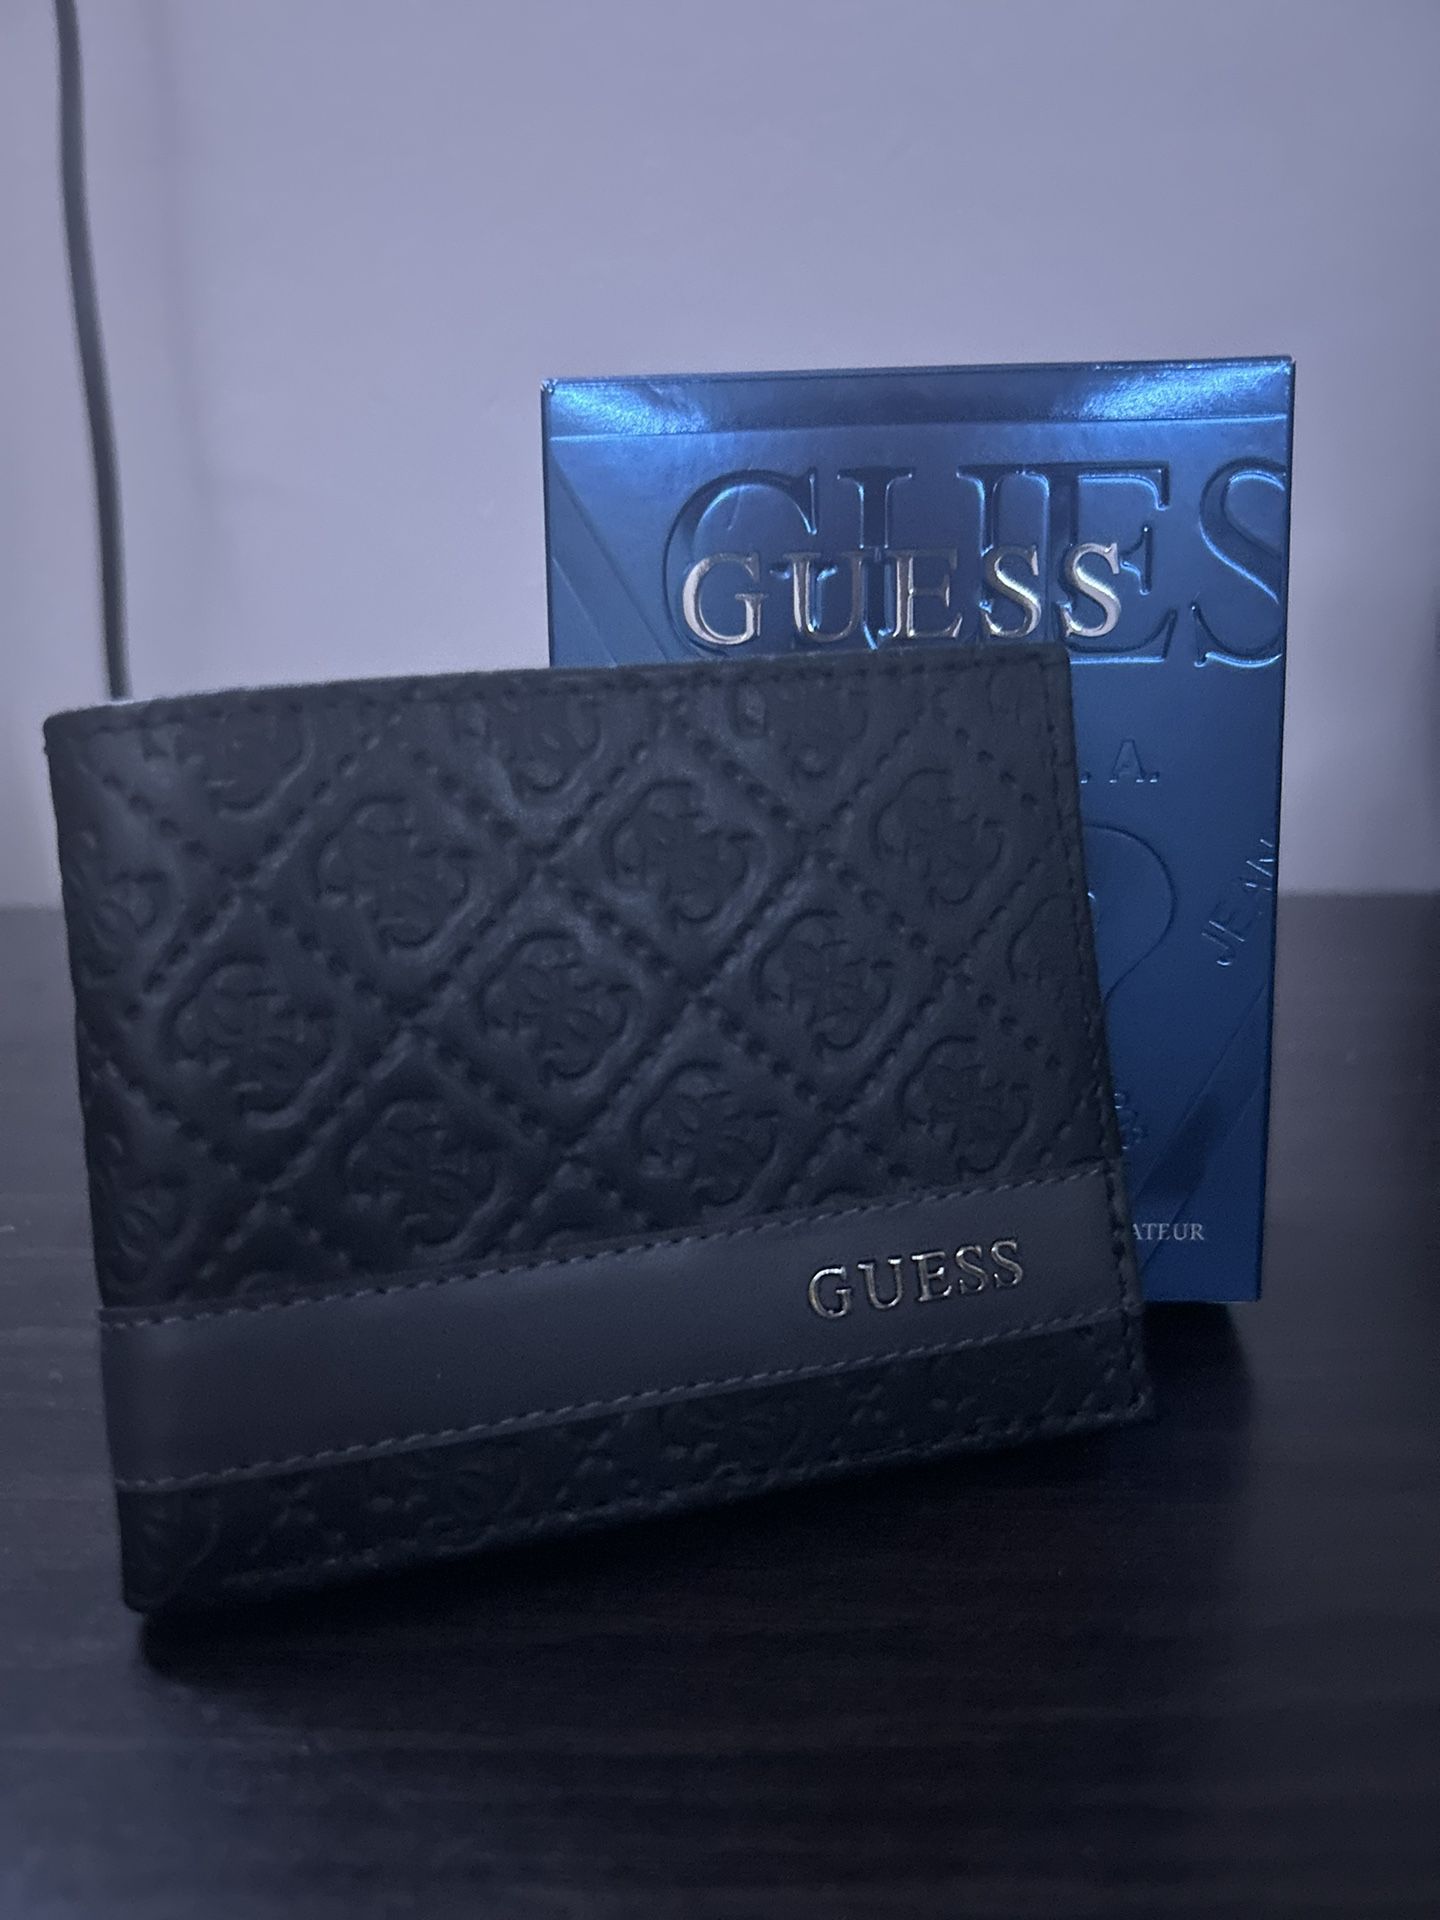 GUESS Men’s Leather Wallet